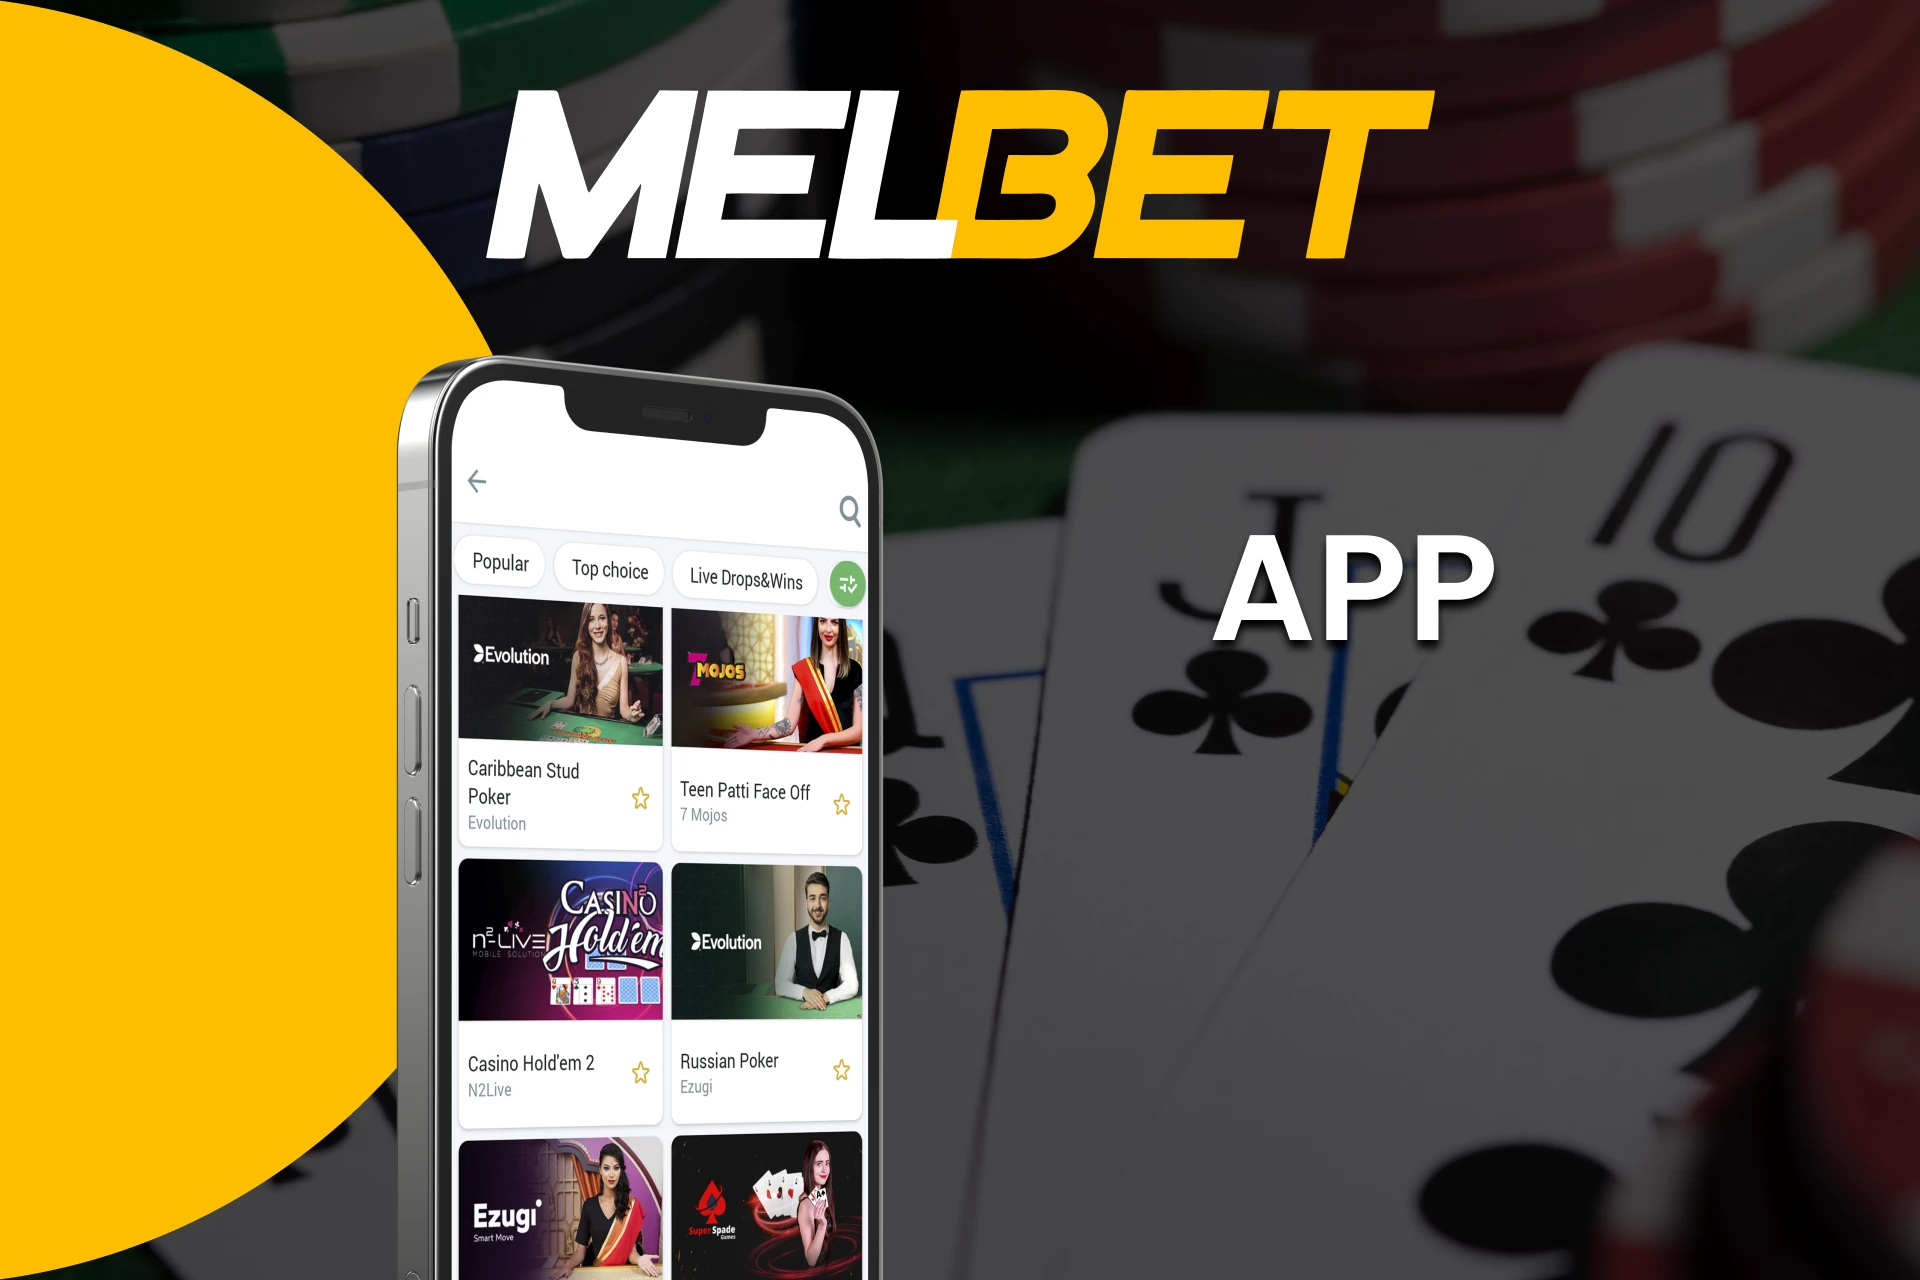 Download the Melbet app to play Poker.